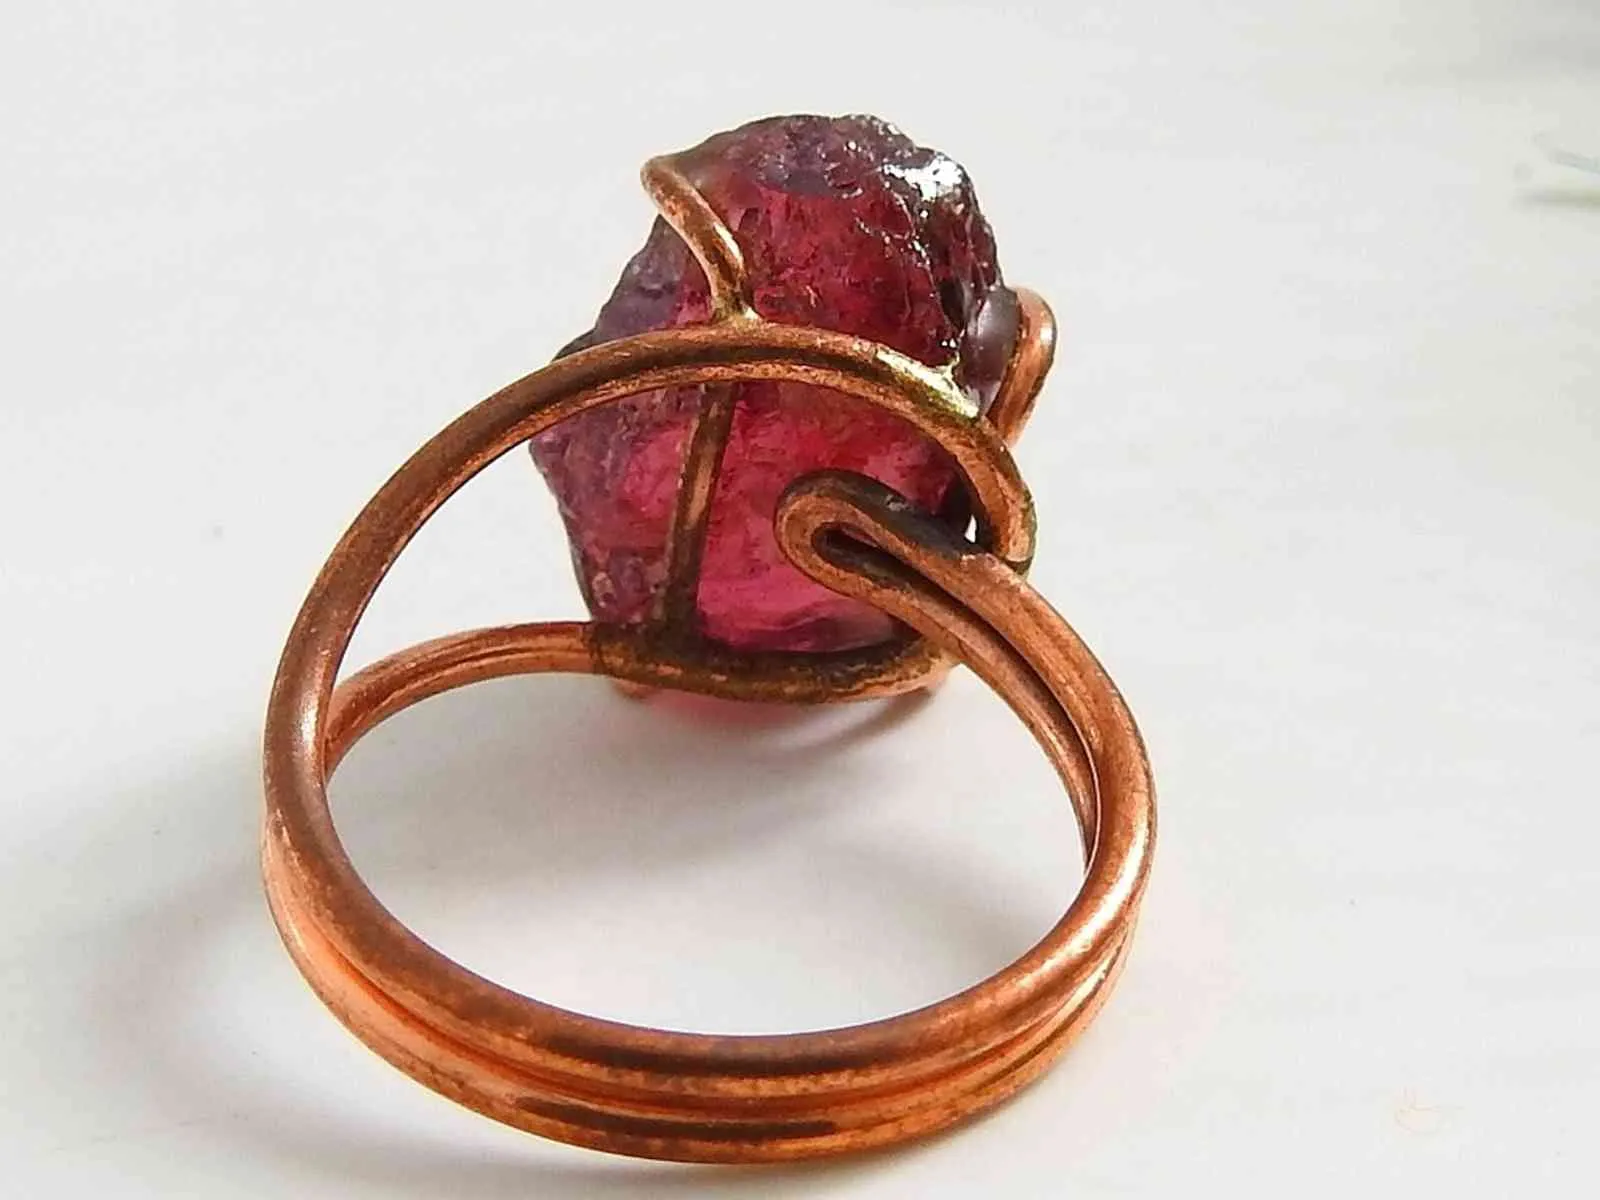 Mens Hip Hop Rock Jewelry: High Quality Real Copper Gold Ring For Men With  Shiny Micro Diamonds, Ruby Red Gemstones, And Punk Accessories Available In  Sizes 7 11 From Frankie_ngok, $32.44 | DHgate.Com